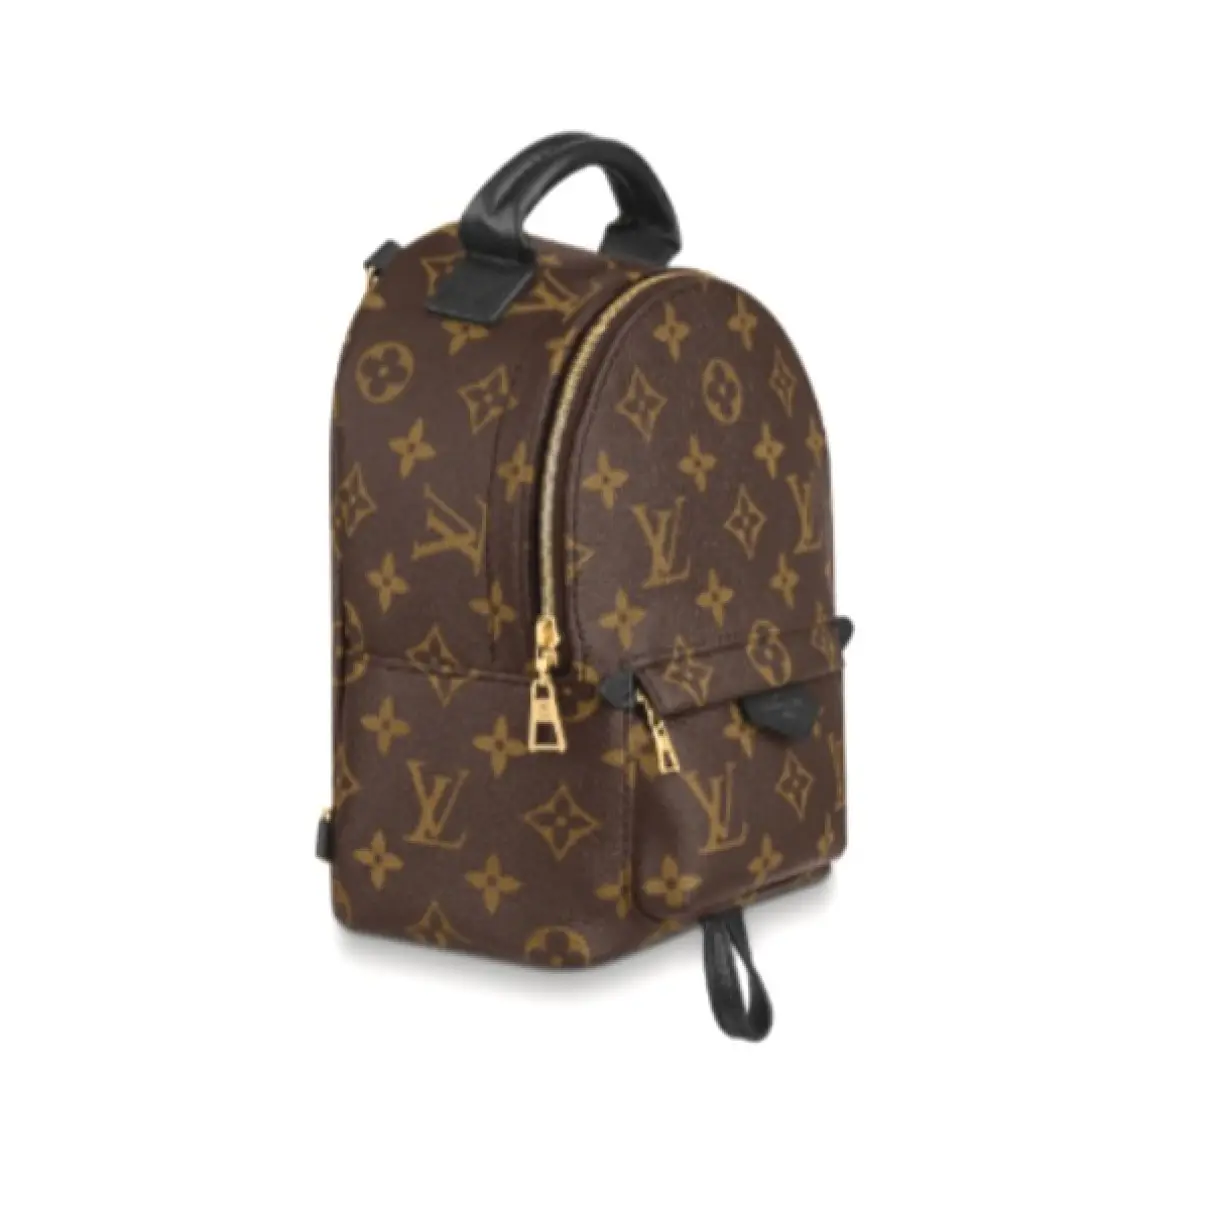 Buy Louis Vuitton Palm Springs leather backpack online